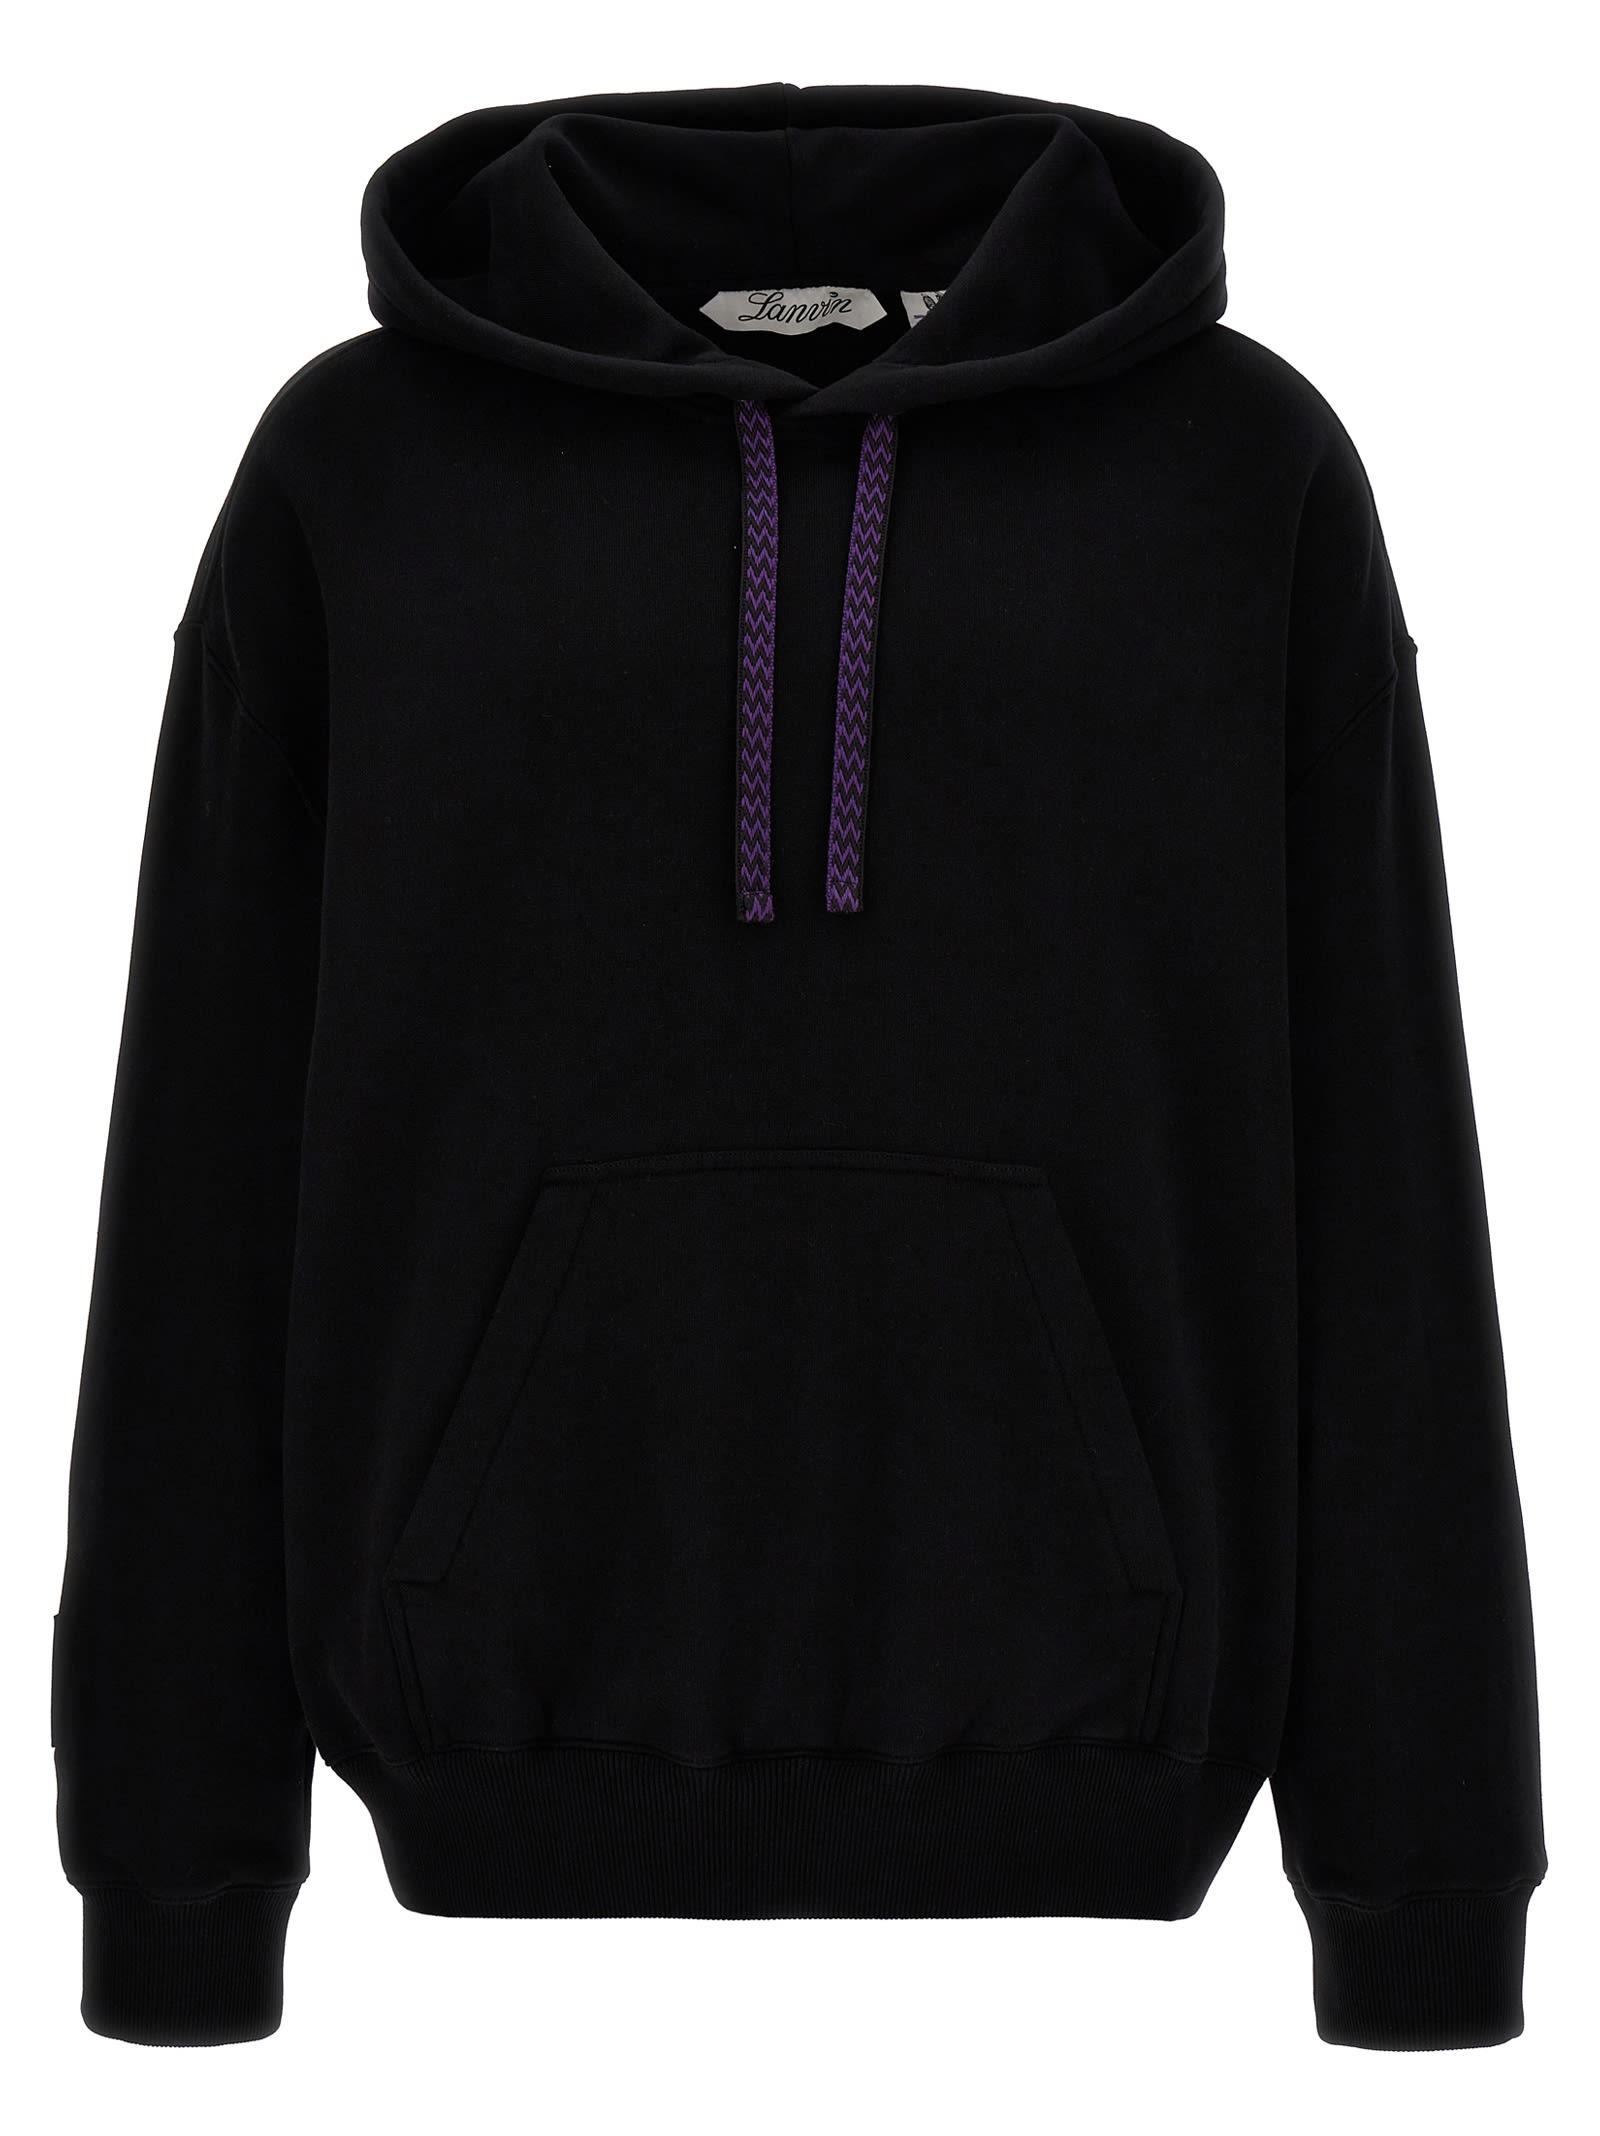 LANVIN LOGO EMBROIDERY HOODIE